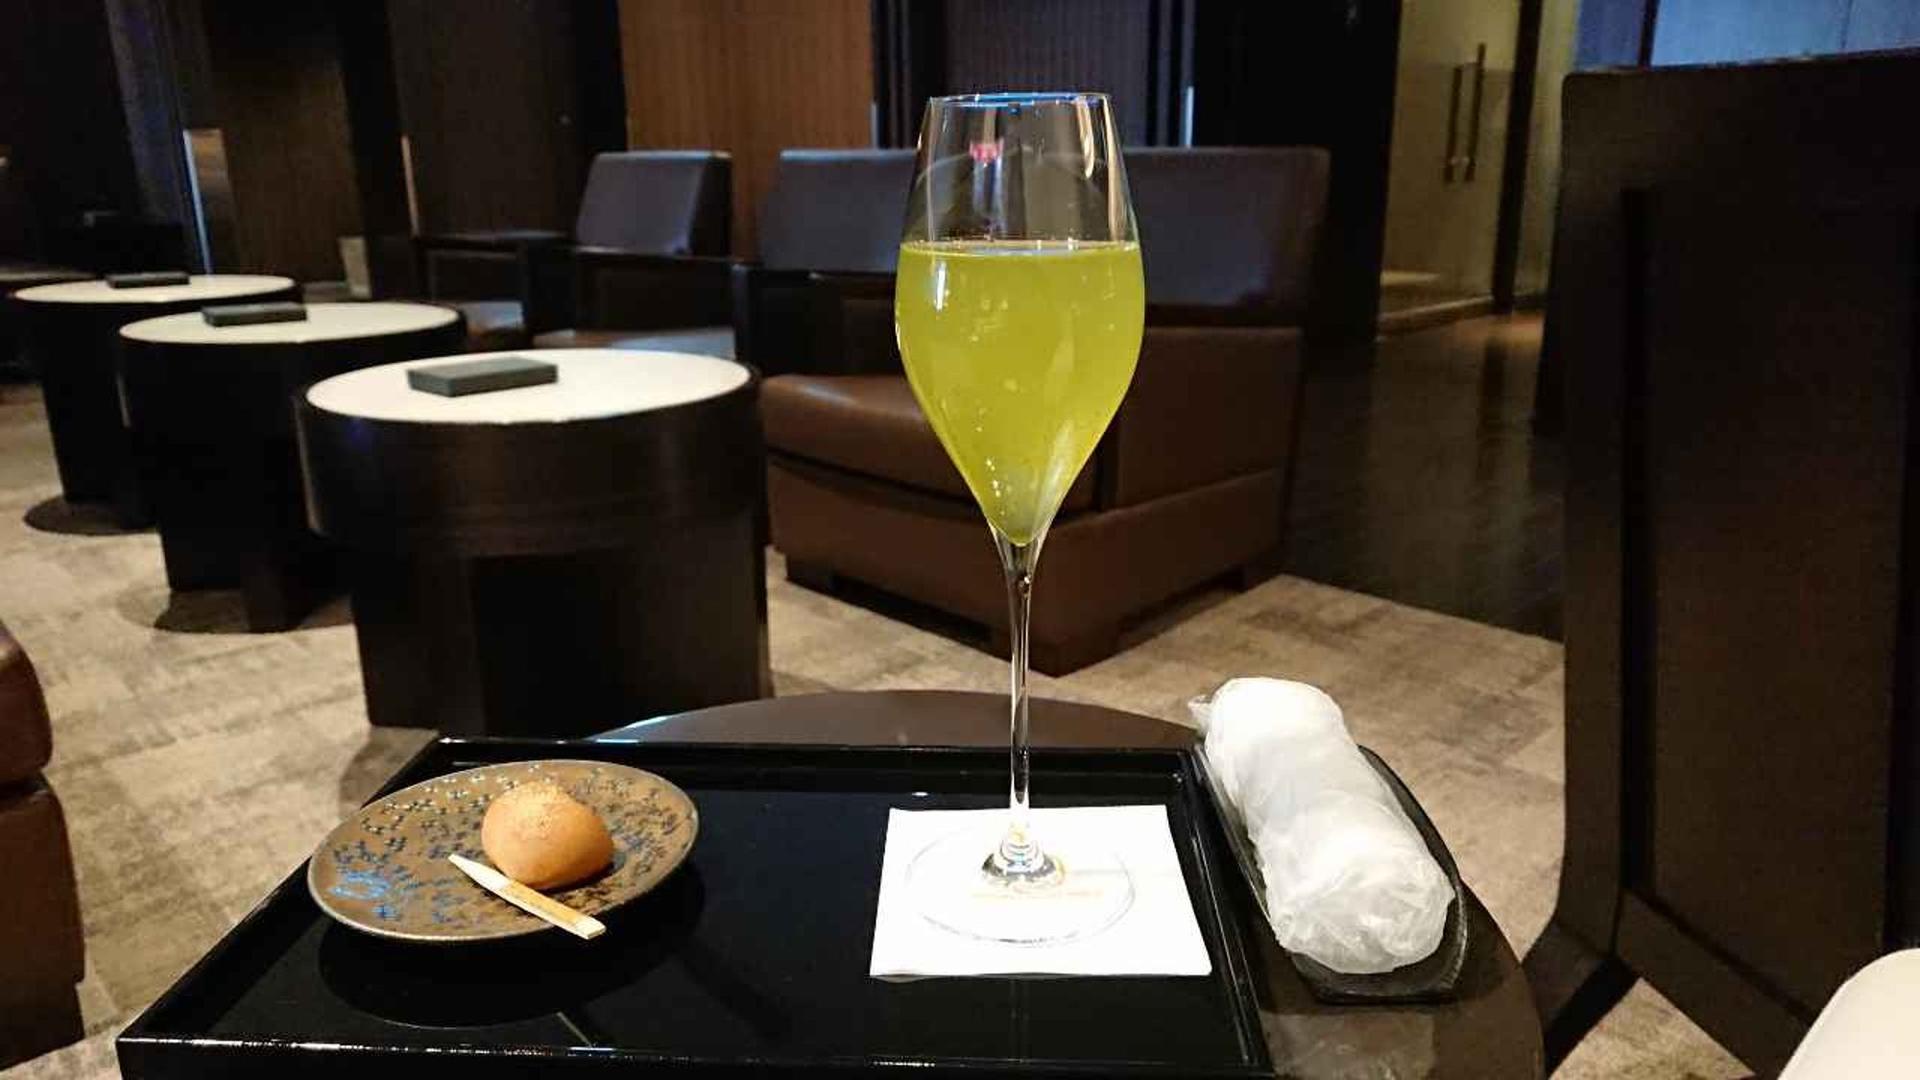 Japan Airlines JAL First Class Lounge image 48 of 50